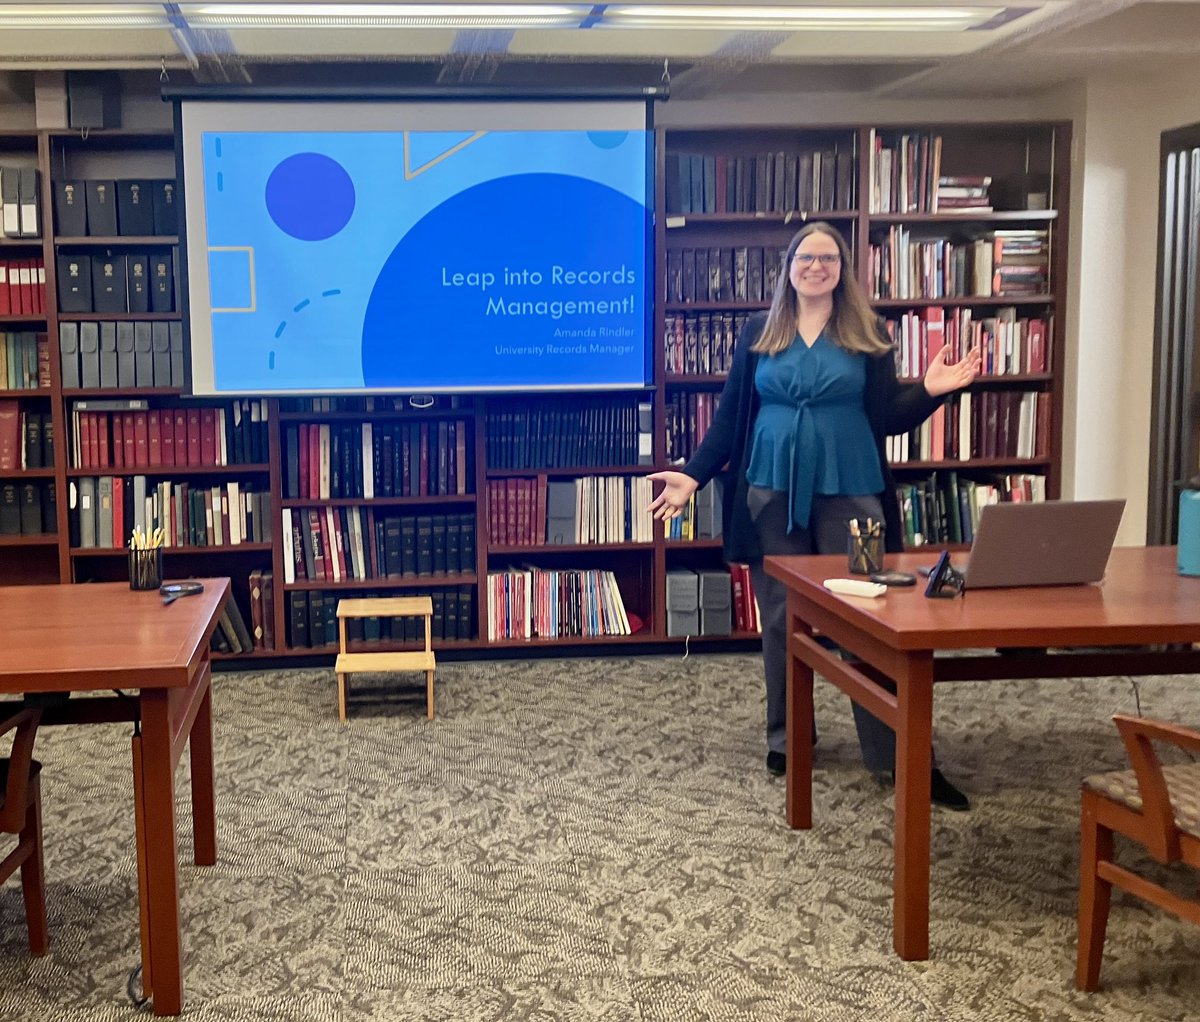 We have regular supplemental training for our student employees and today, University Records Manager Amanda Rindler invites them to “Leap into Records Management”! #SeeWhatSheDidThere